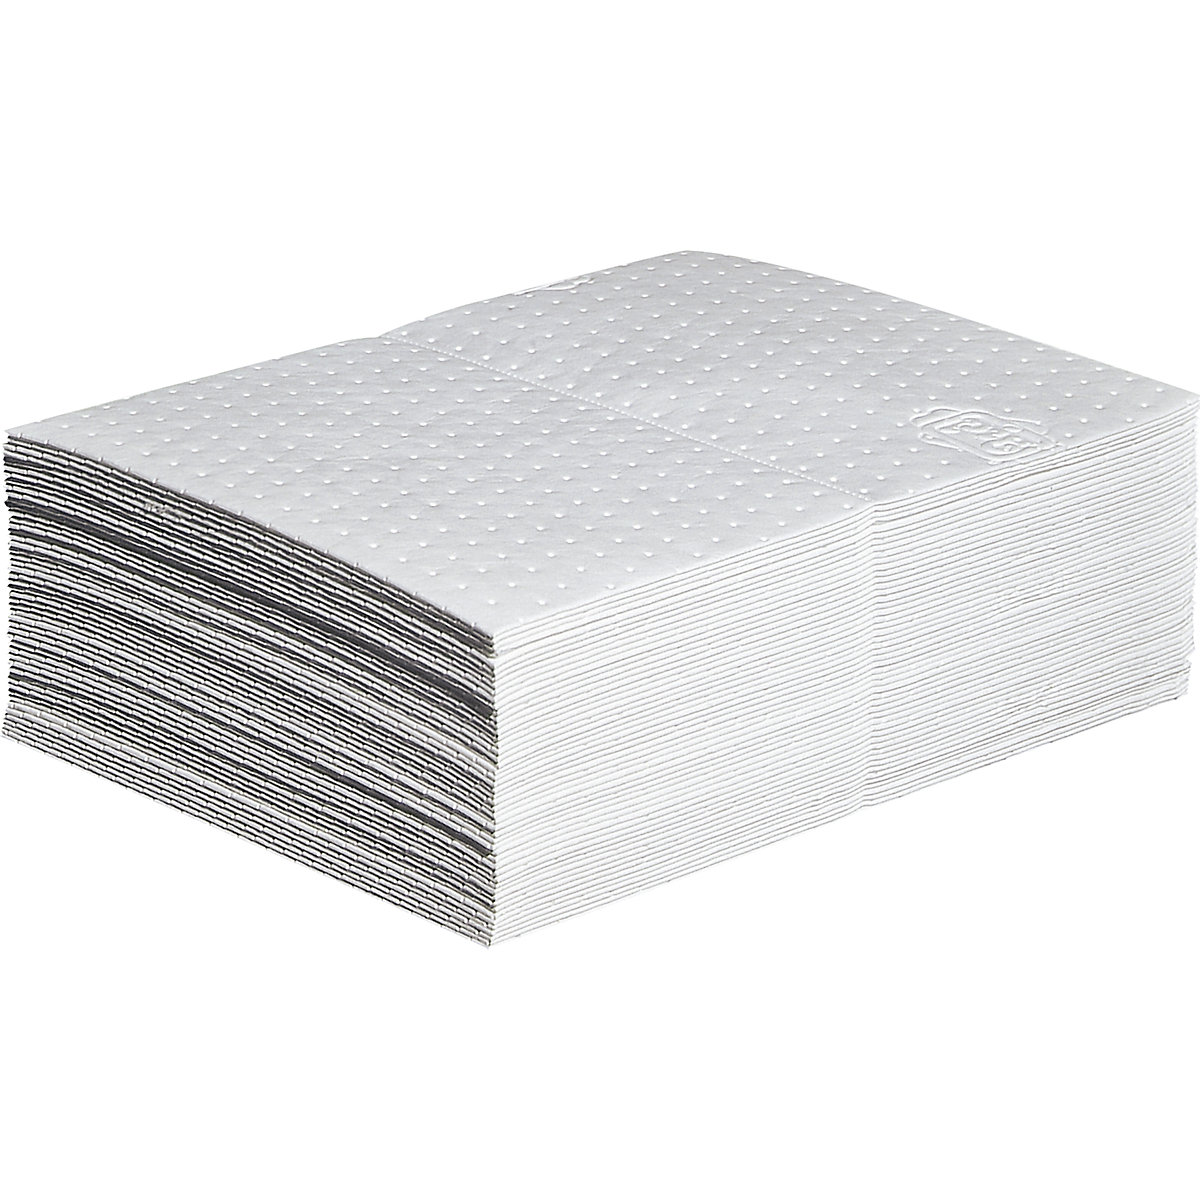 Oil-Only absorbent sheeting mat – PIG